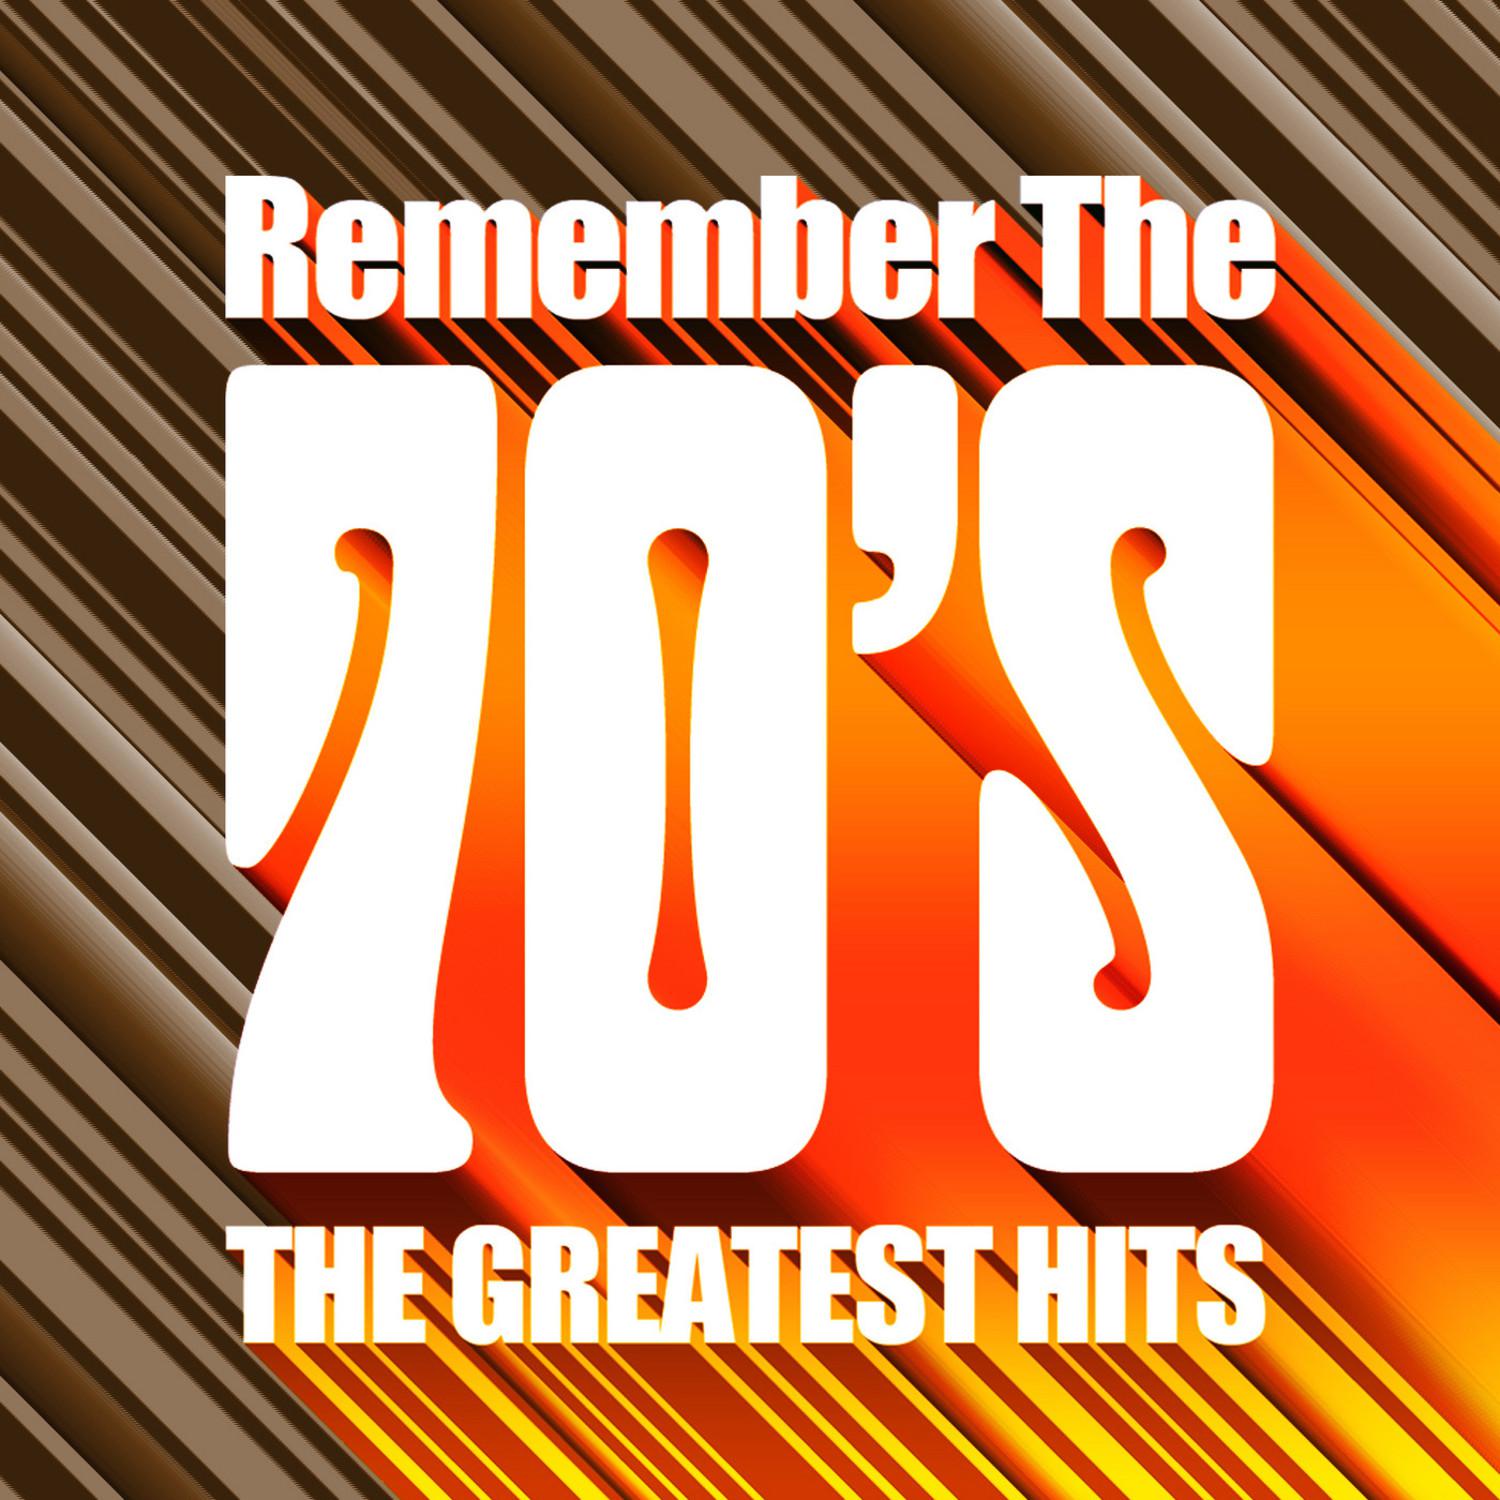 Remember the 70's - The Greatest Hits